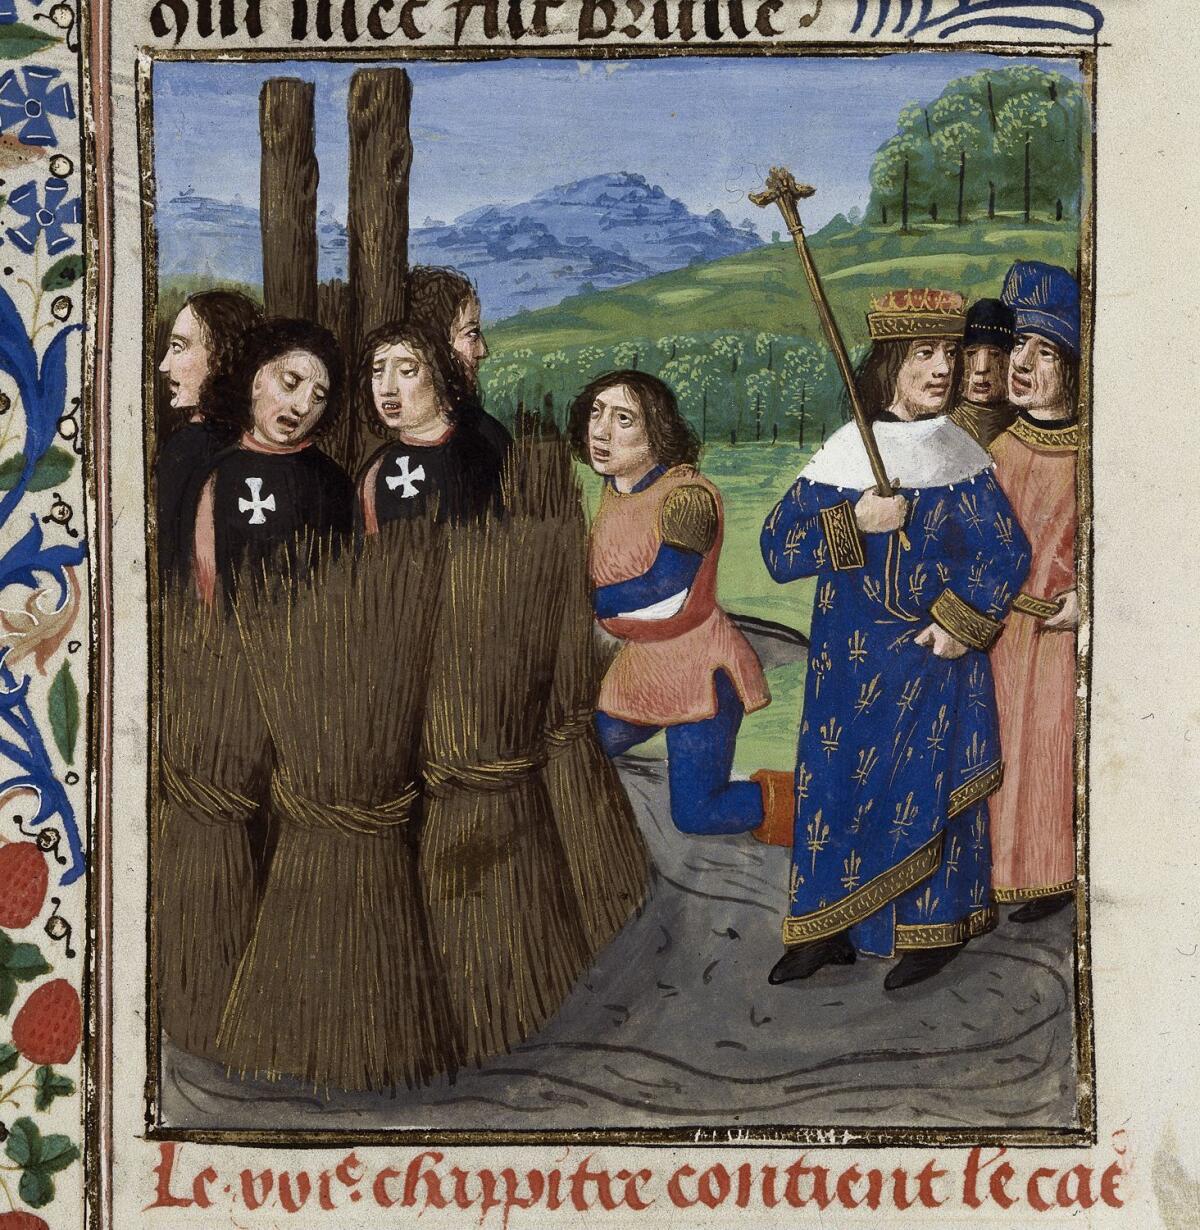 An image from Boccaccio's De Casibus Virorum Illustrium, or The Fall of Princes, shows Prince Philip IV of France ordering the burning of Knights Templar at the stake. (British Library)